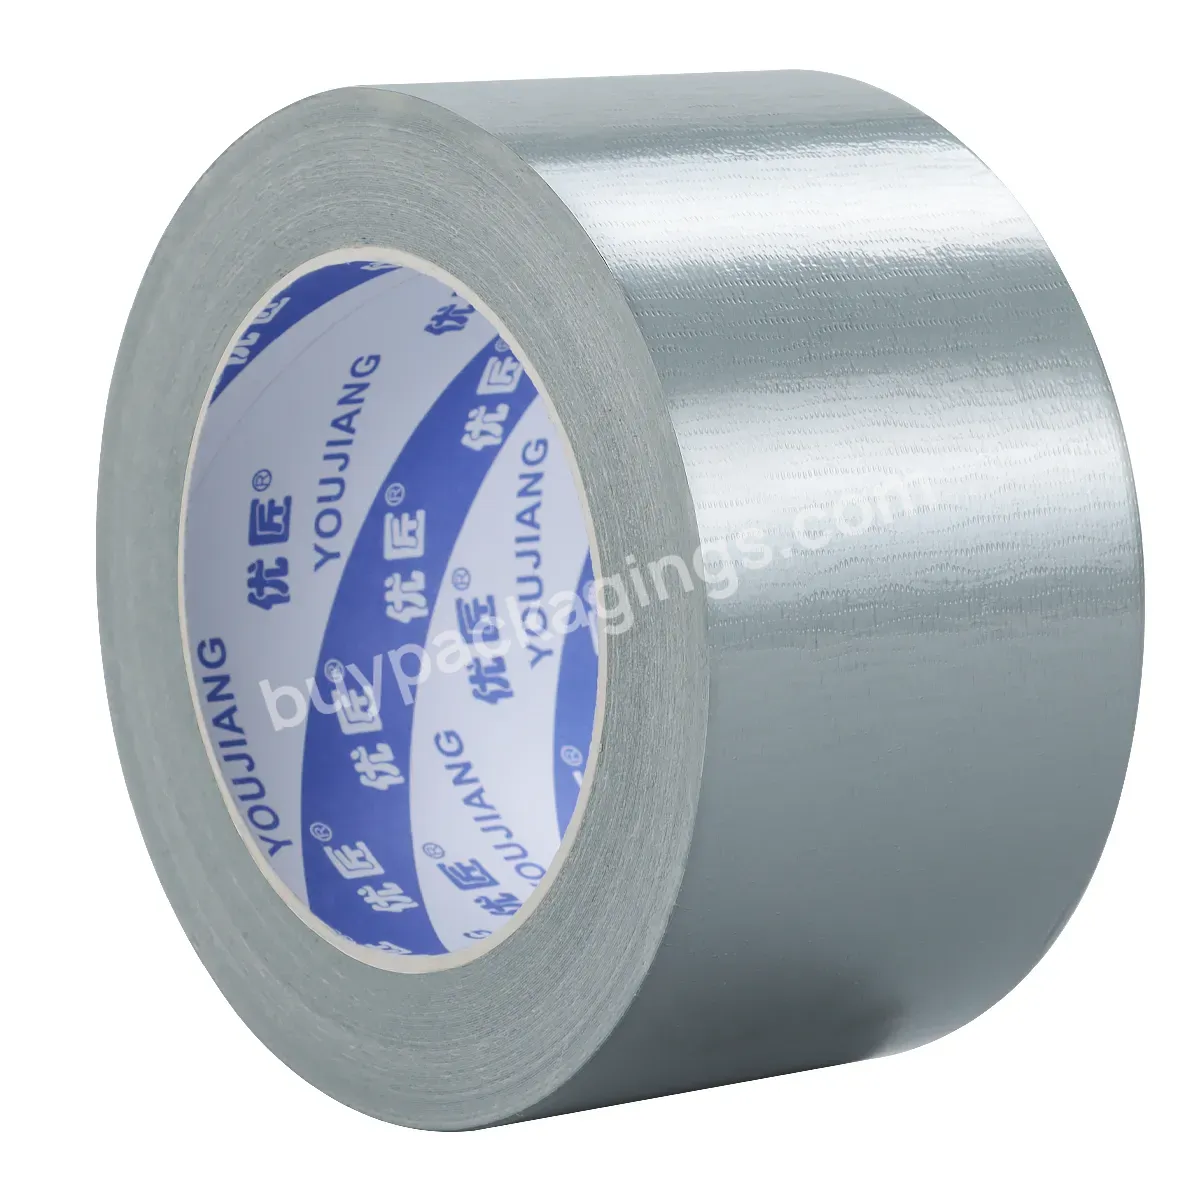 You Jiang Super Strong Rubber Cotton Tape Heavy Duty Waterproof Duct Tape - Buy Duct Tape,Sealing Tape,Rubberized Tape.